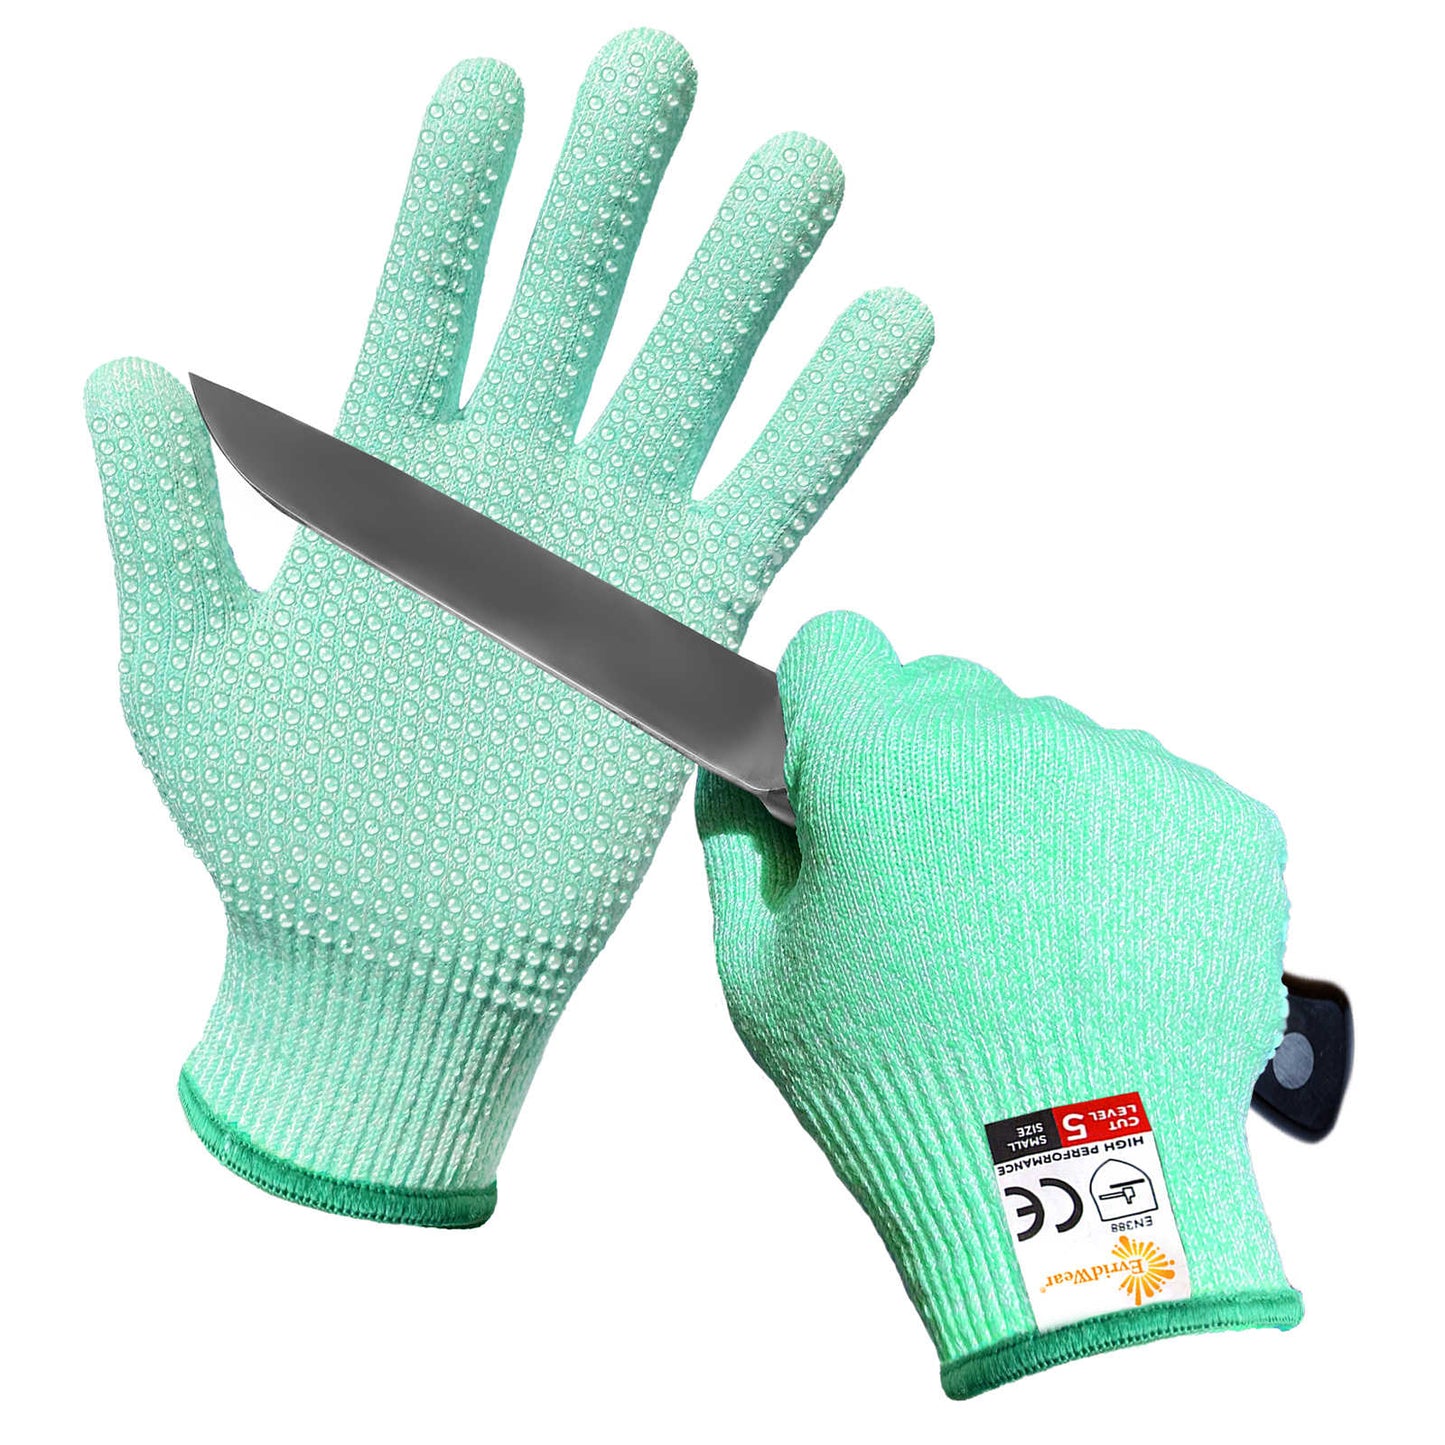 High Performance Cut Resistant Protective Cutting Gloves Durable Safety  Level 5 Food Grade Meat Cutting Peeling Oysters Glove Garden Work Wood  Carving